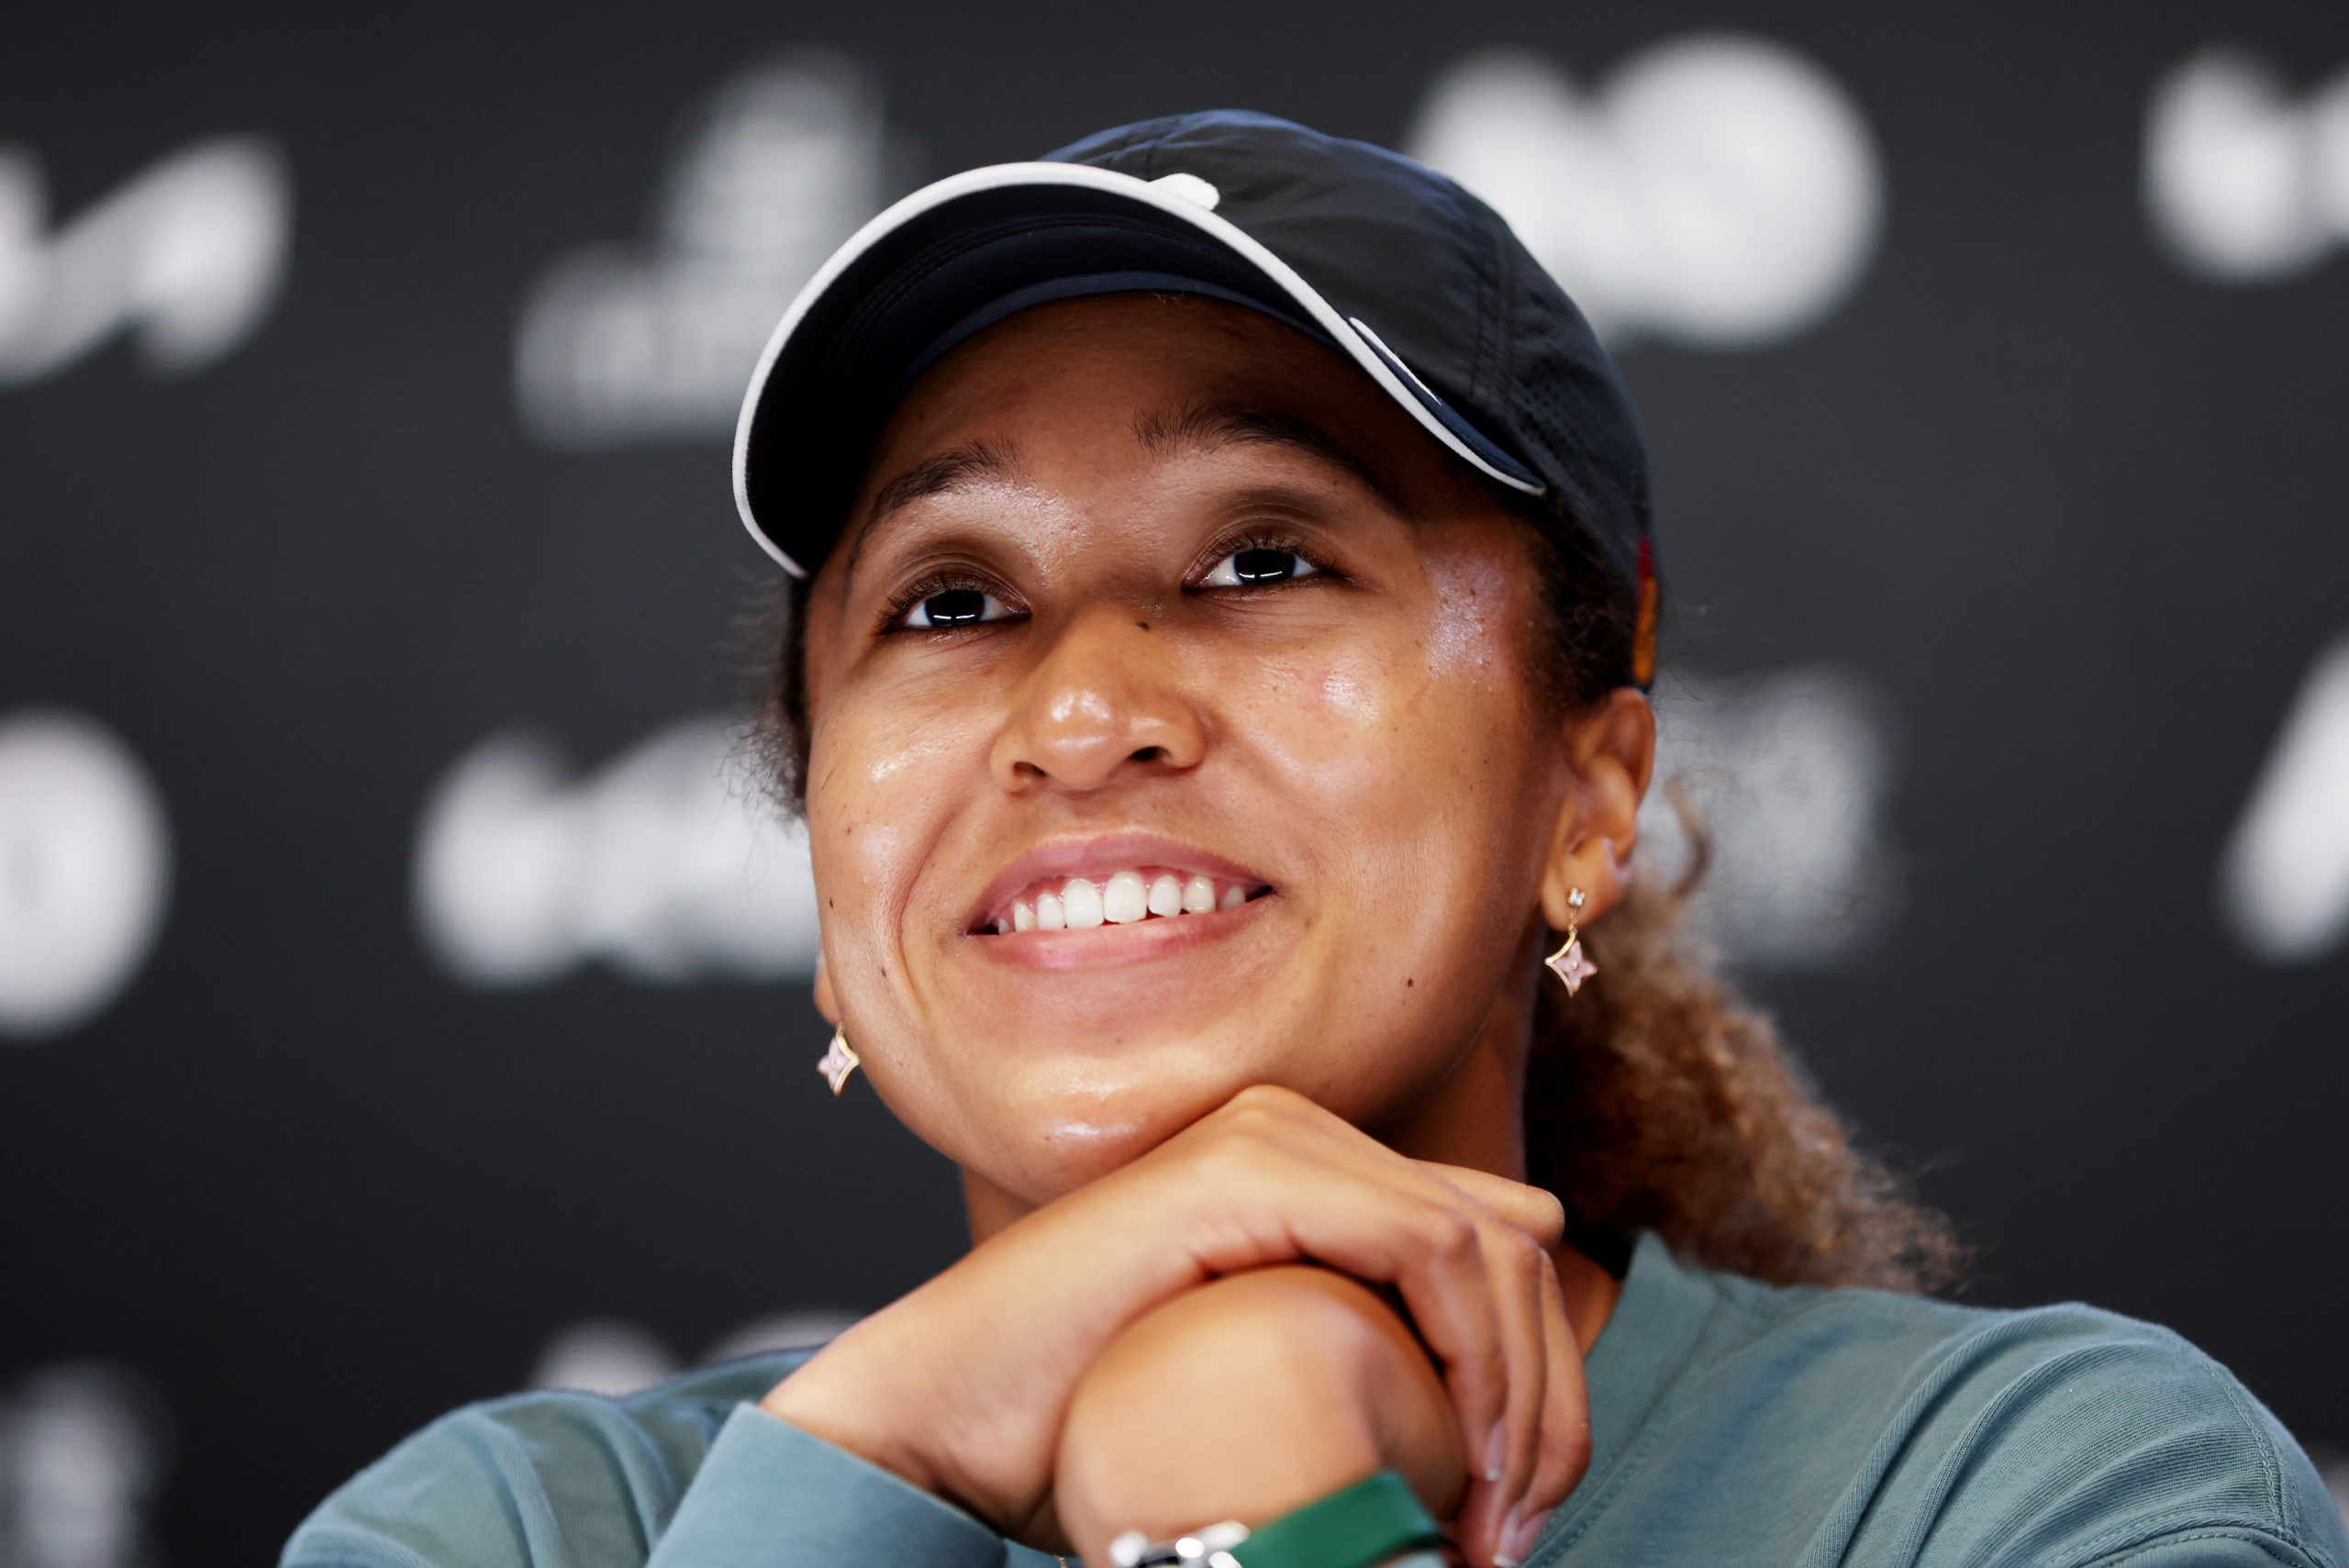 FILE PHOTO: Tennis - Australian Open - Melbourne Park, Melbourne, Australia - January 21, 2022 Japan's Naomi Osaka during a press conference after losing her third round match against Amanda Anisimova of the U.S. 